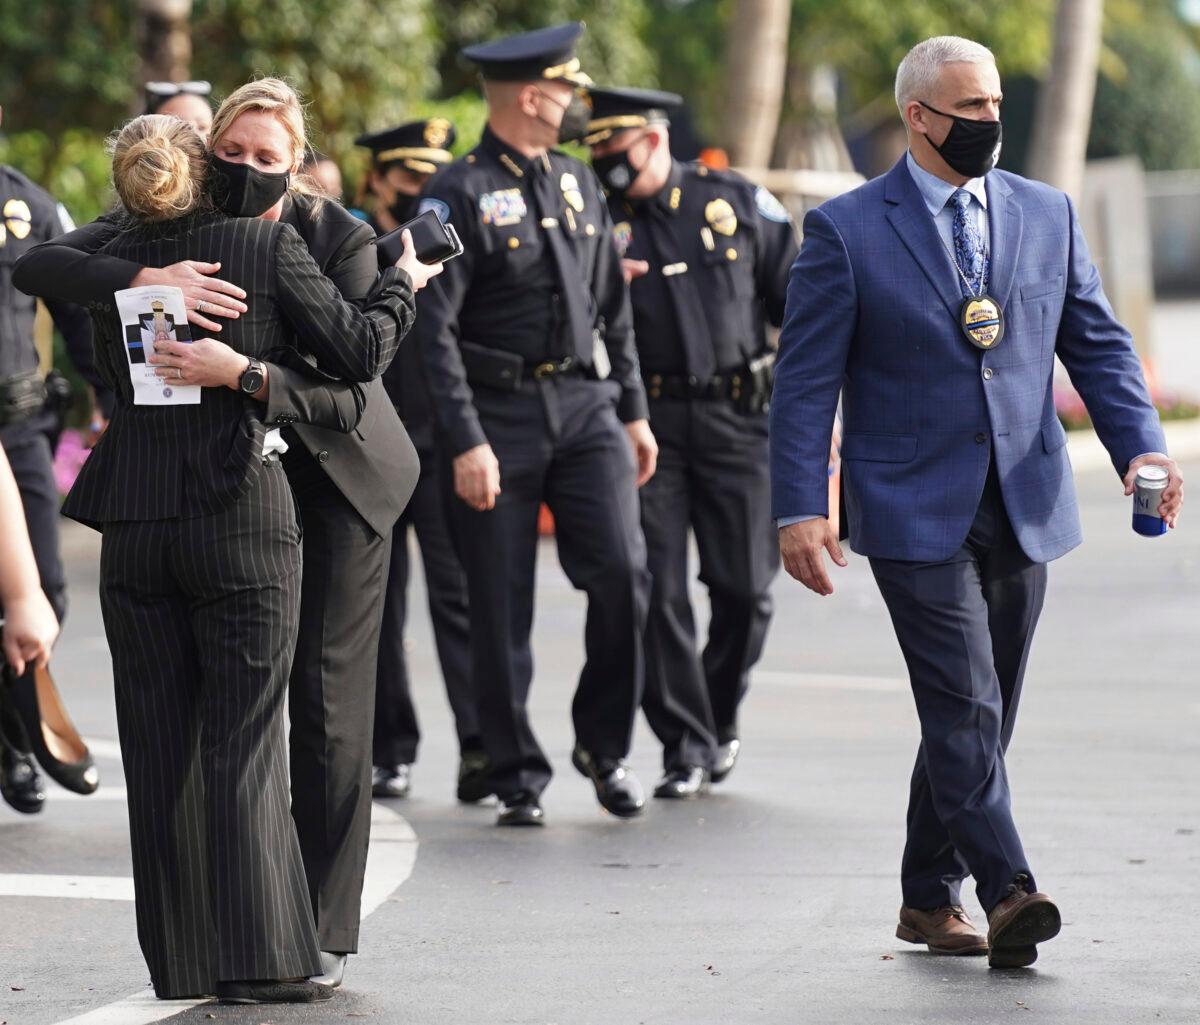 Law enforcement representatives embrace as they leave a memorial service for Special Agent Laura Schwartzenberger, in Miami Gardens, Fla., on Feb. 6, 2021. (Hans Deryk/AP Photo)